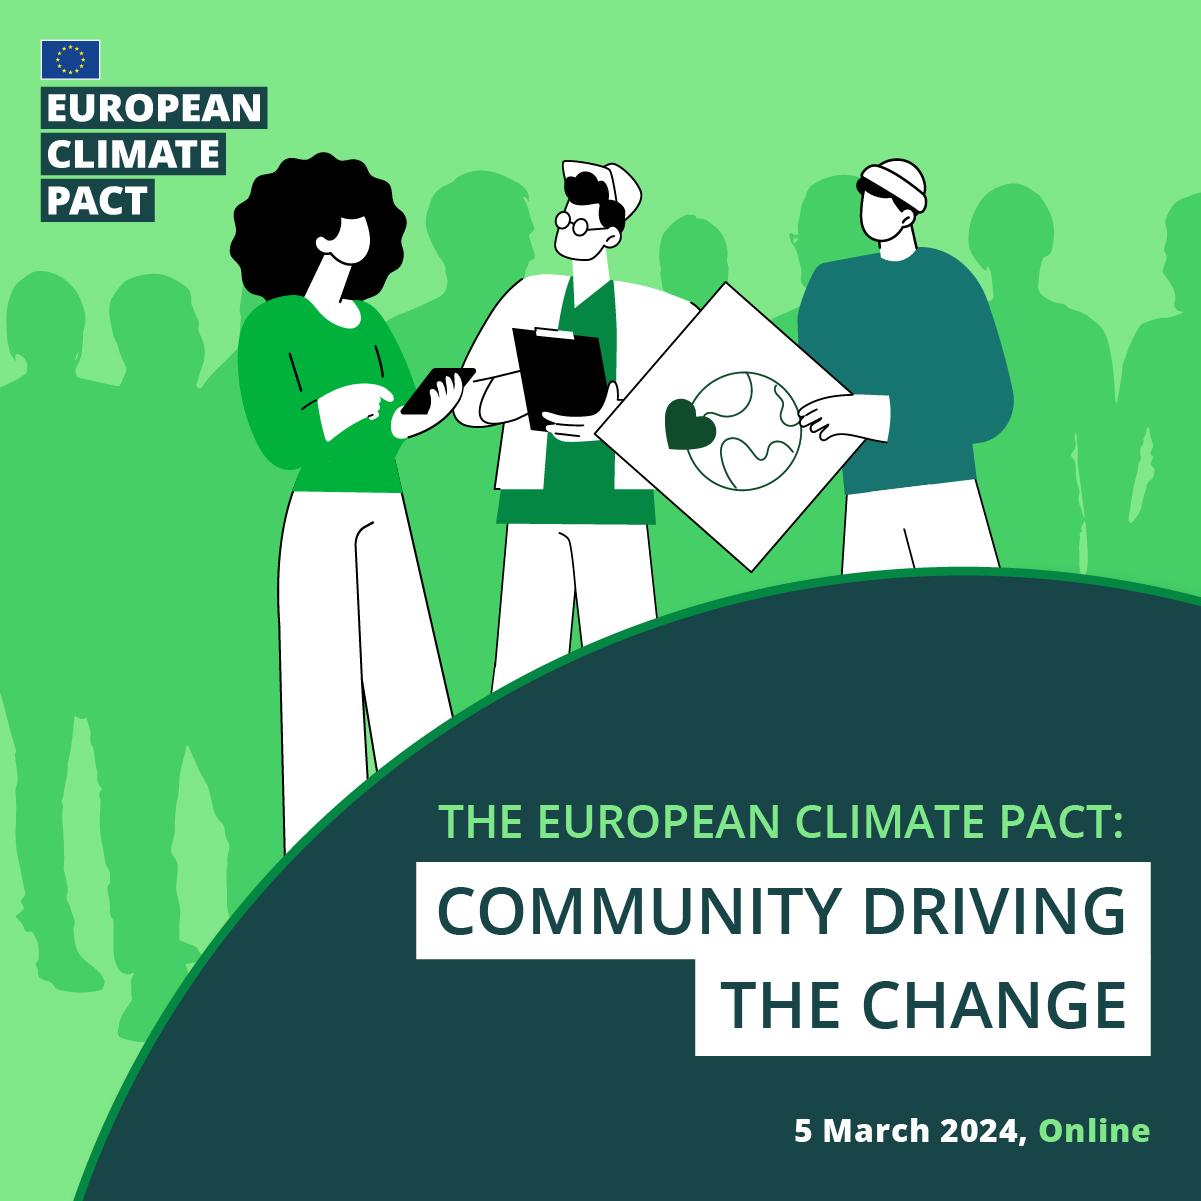 The European Climate Pact: Community Driving the Change